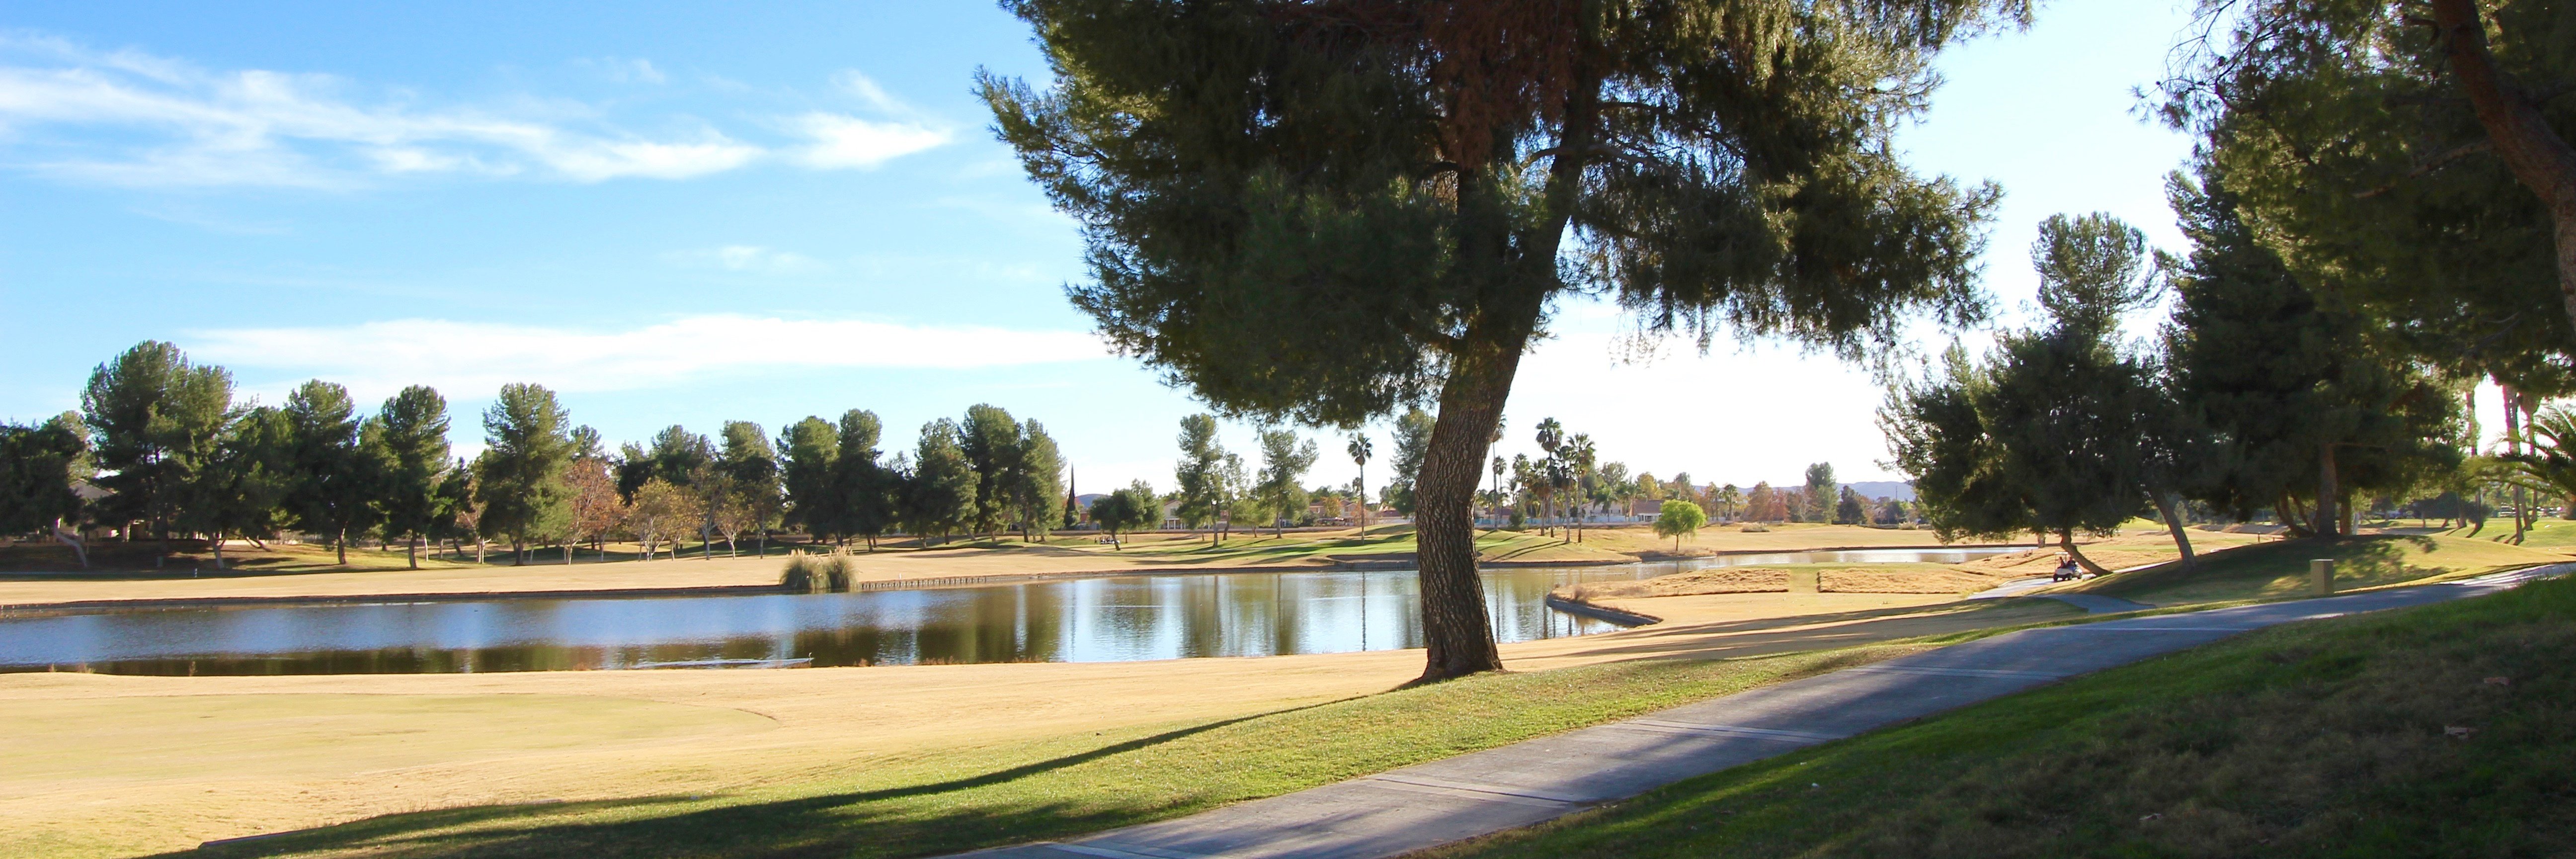 A view of the lake at Oasis, located in Menifee Ca